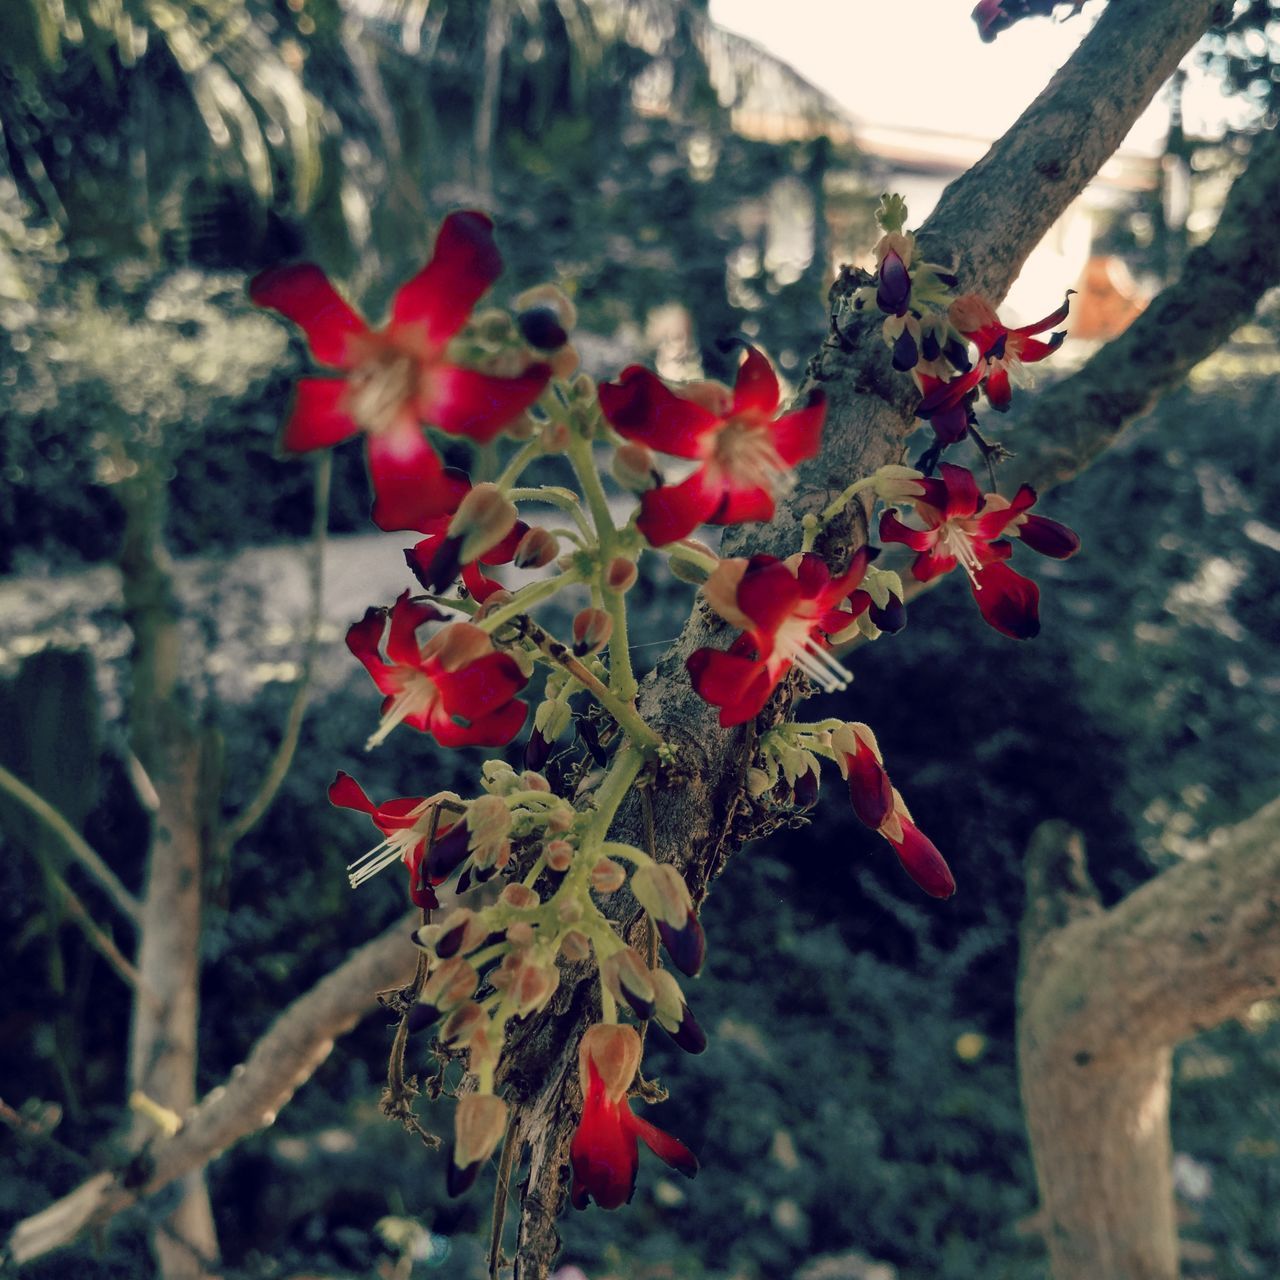 flower, growth, freshness, red, focus on foreground, fragility, beauty in nature, petal, close-up, nature, plant, flower head, blooming, tree, in bloom, blossom, botany, leaf, branch, day